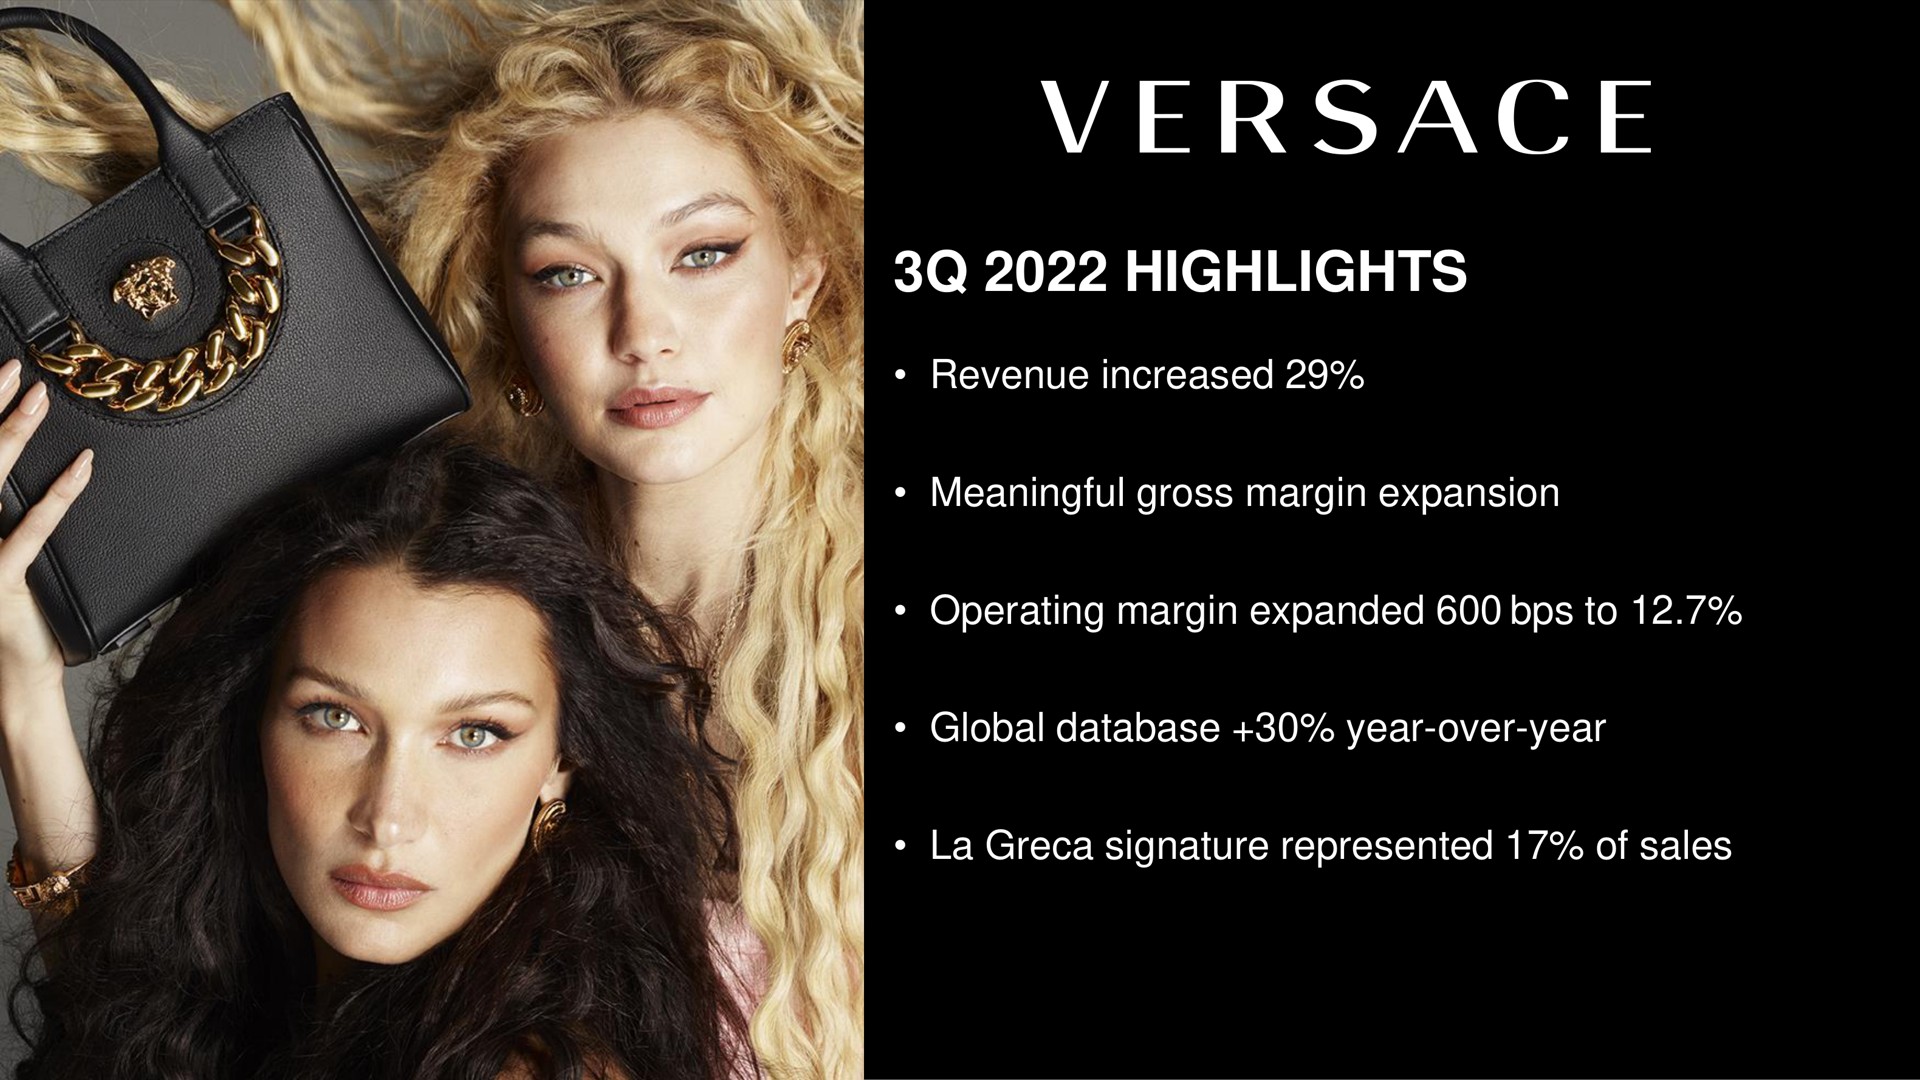 highlights revenue increased meaningful gross margin expansion operating margin expanded to global year over year signature represented of sales | Capri Holdings